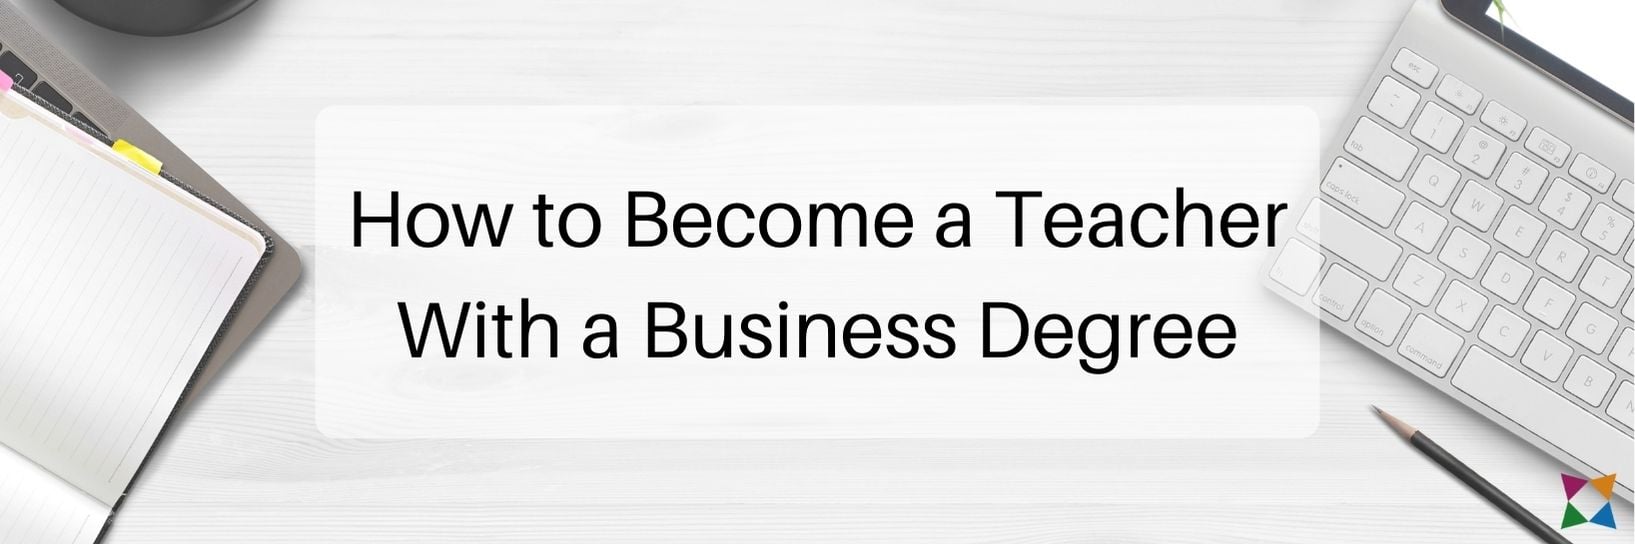 How to Become a Teacher with a Business Degree: 5 Steps to Follow